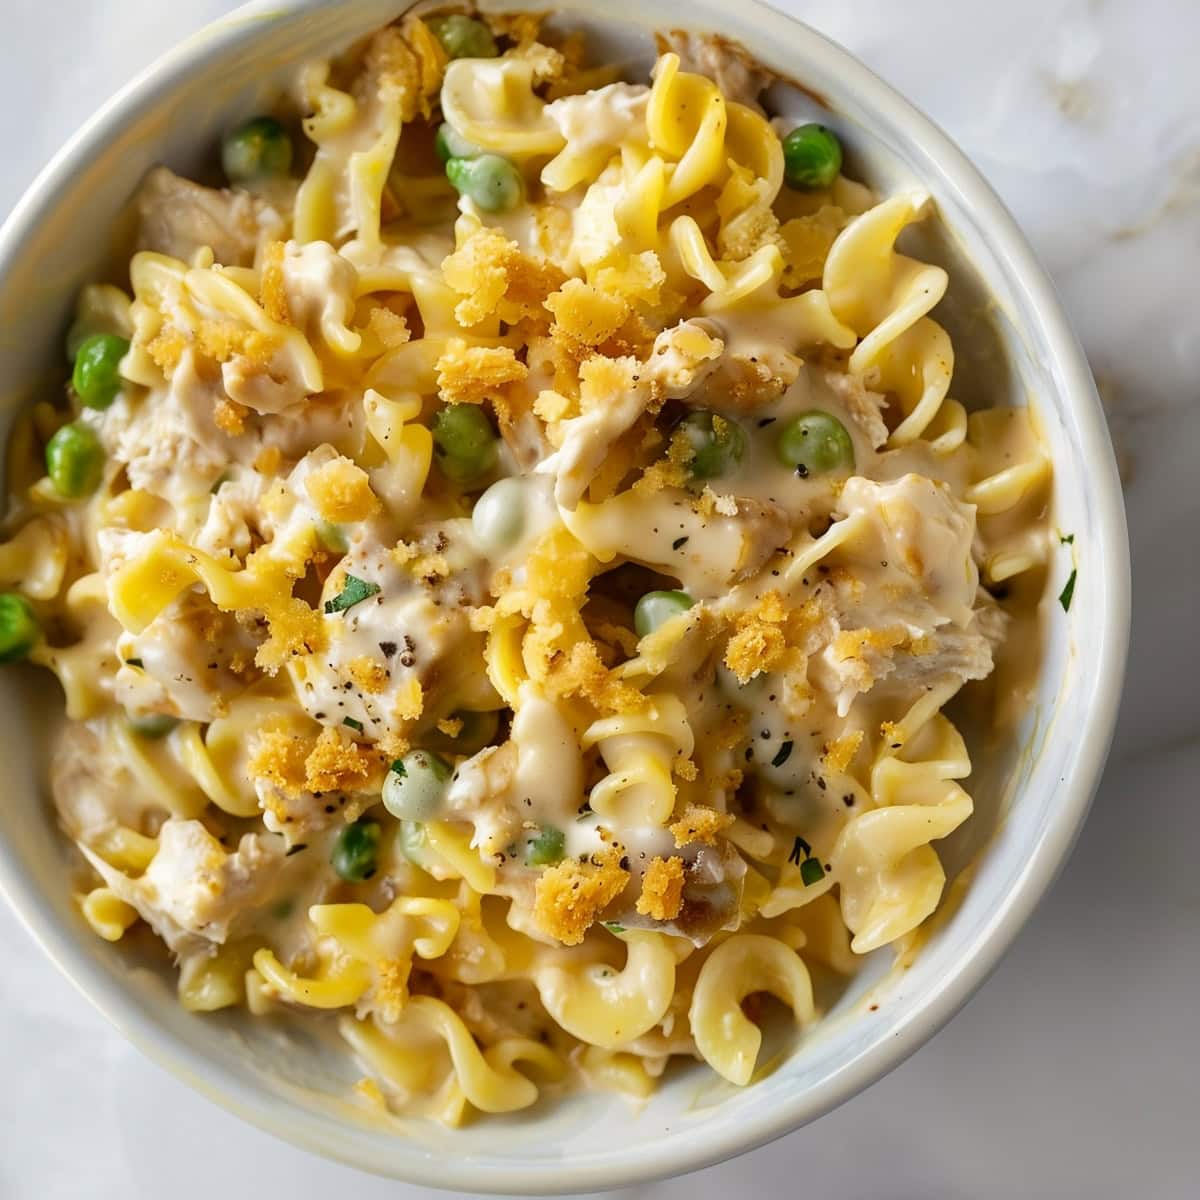 A serving of creamy tuna noodle casserole topped with crispy breadcrumbs.